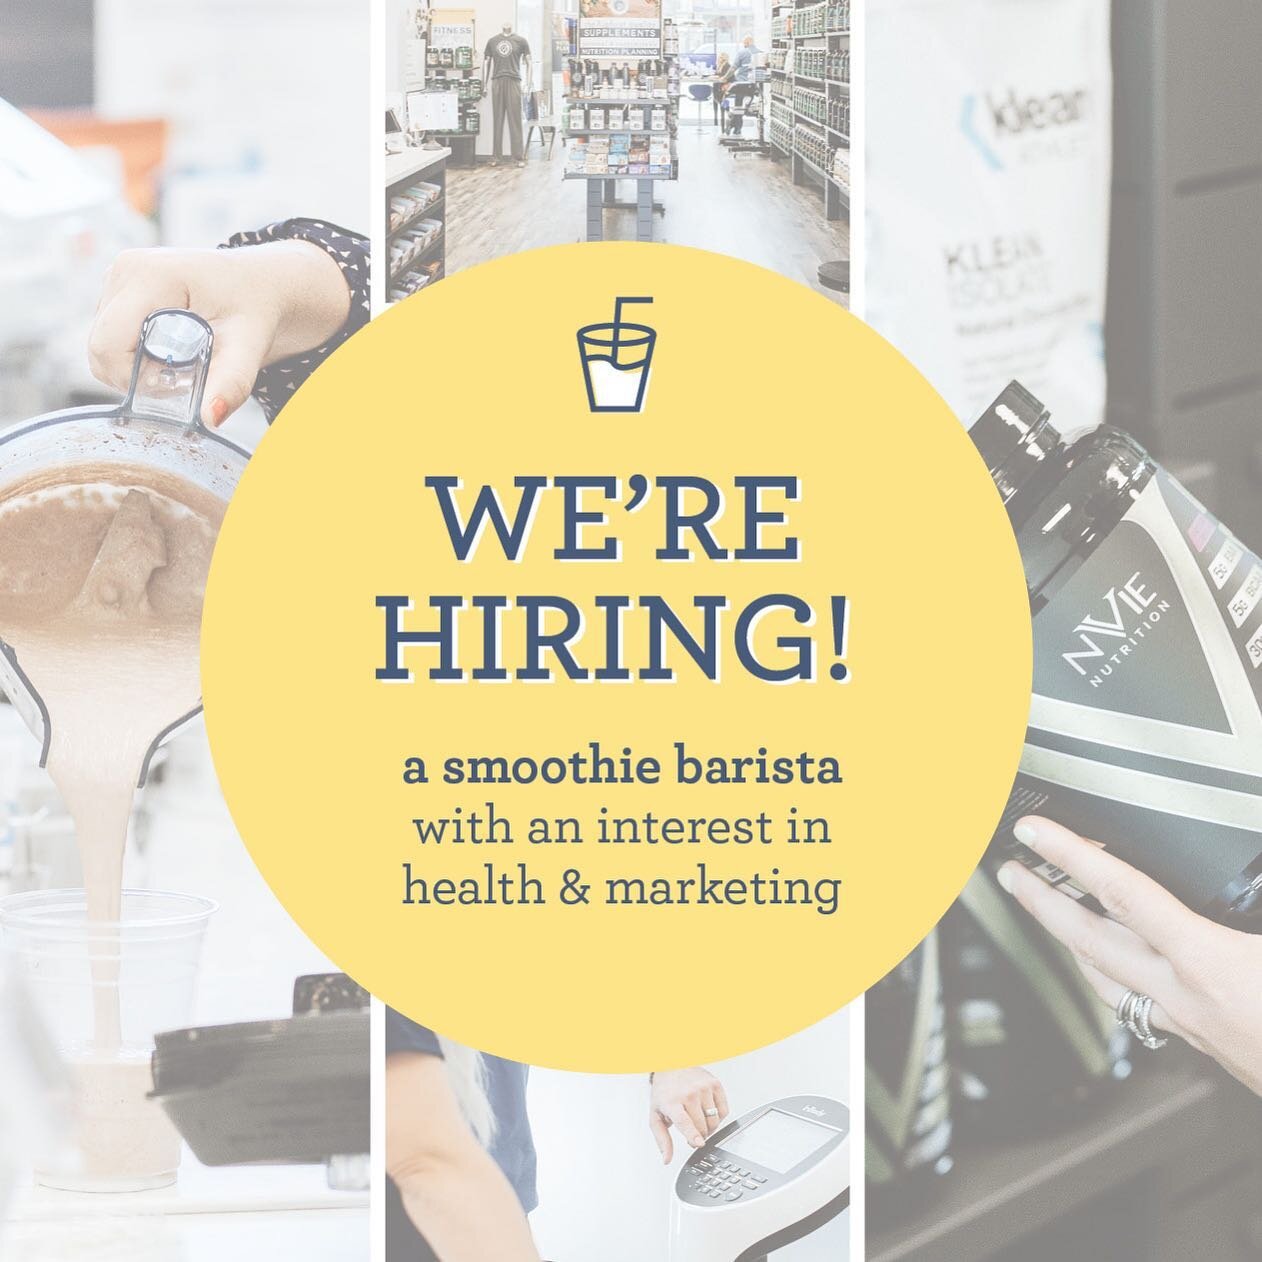 WE'RE HIRING! ⭐️ We've had some amazing team members who have been with us over the past couple years and unfortunately, Darren is leaving us to pursue a career in finance and we are super excited for him!

So, we're hiring a smoothie barista and sto